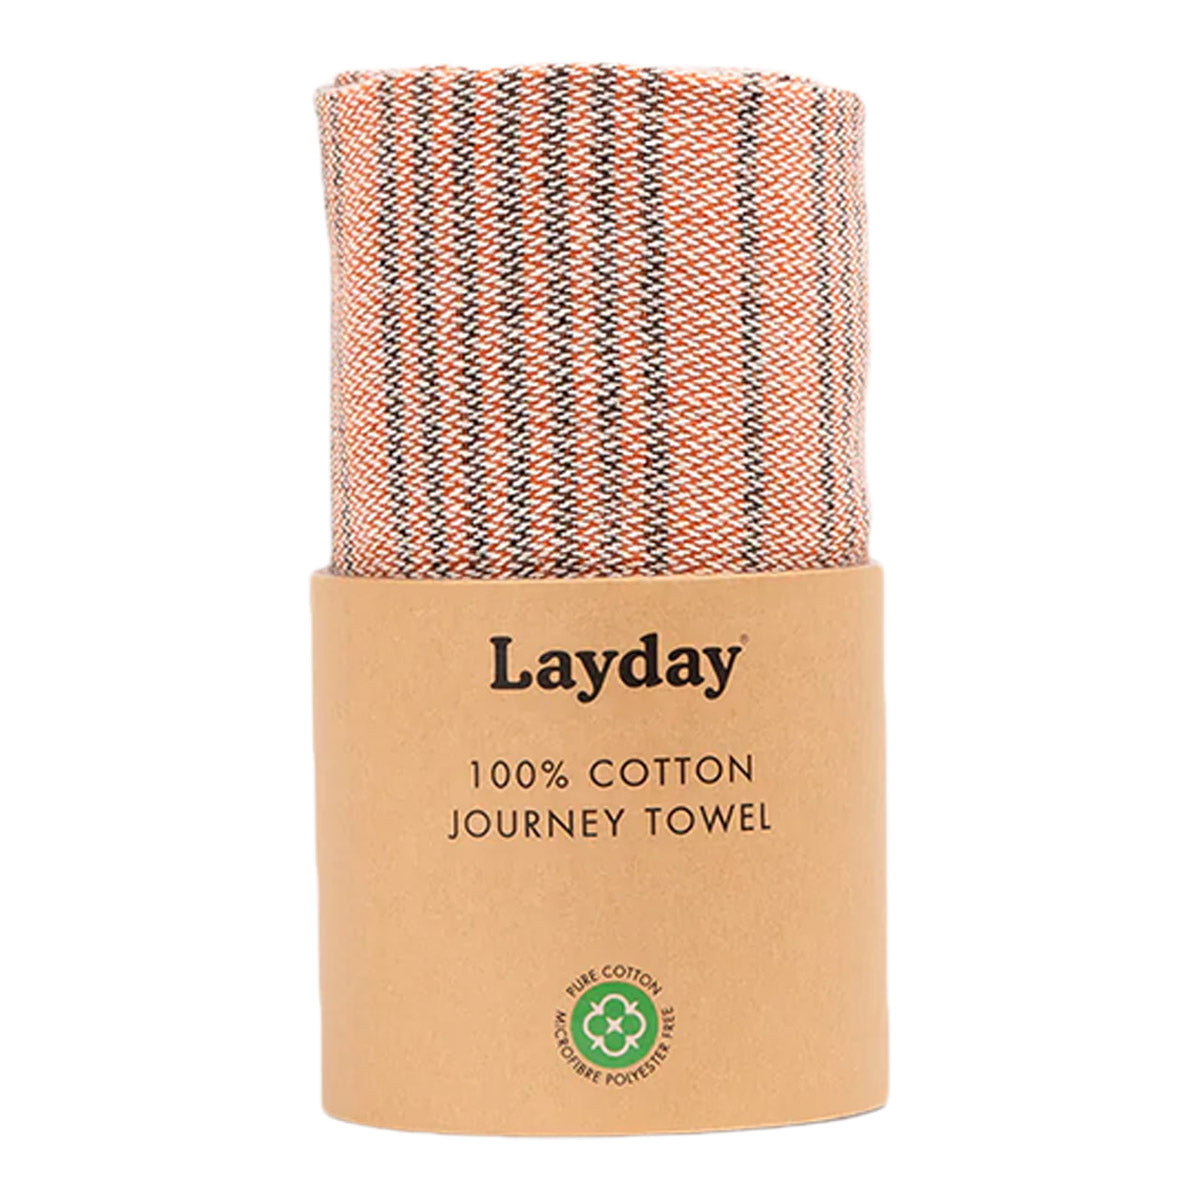 Layday Flat Weave Travel Towels